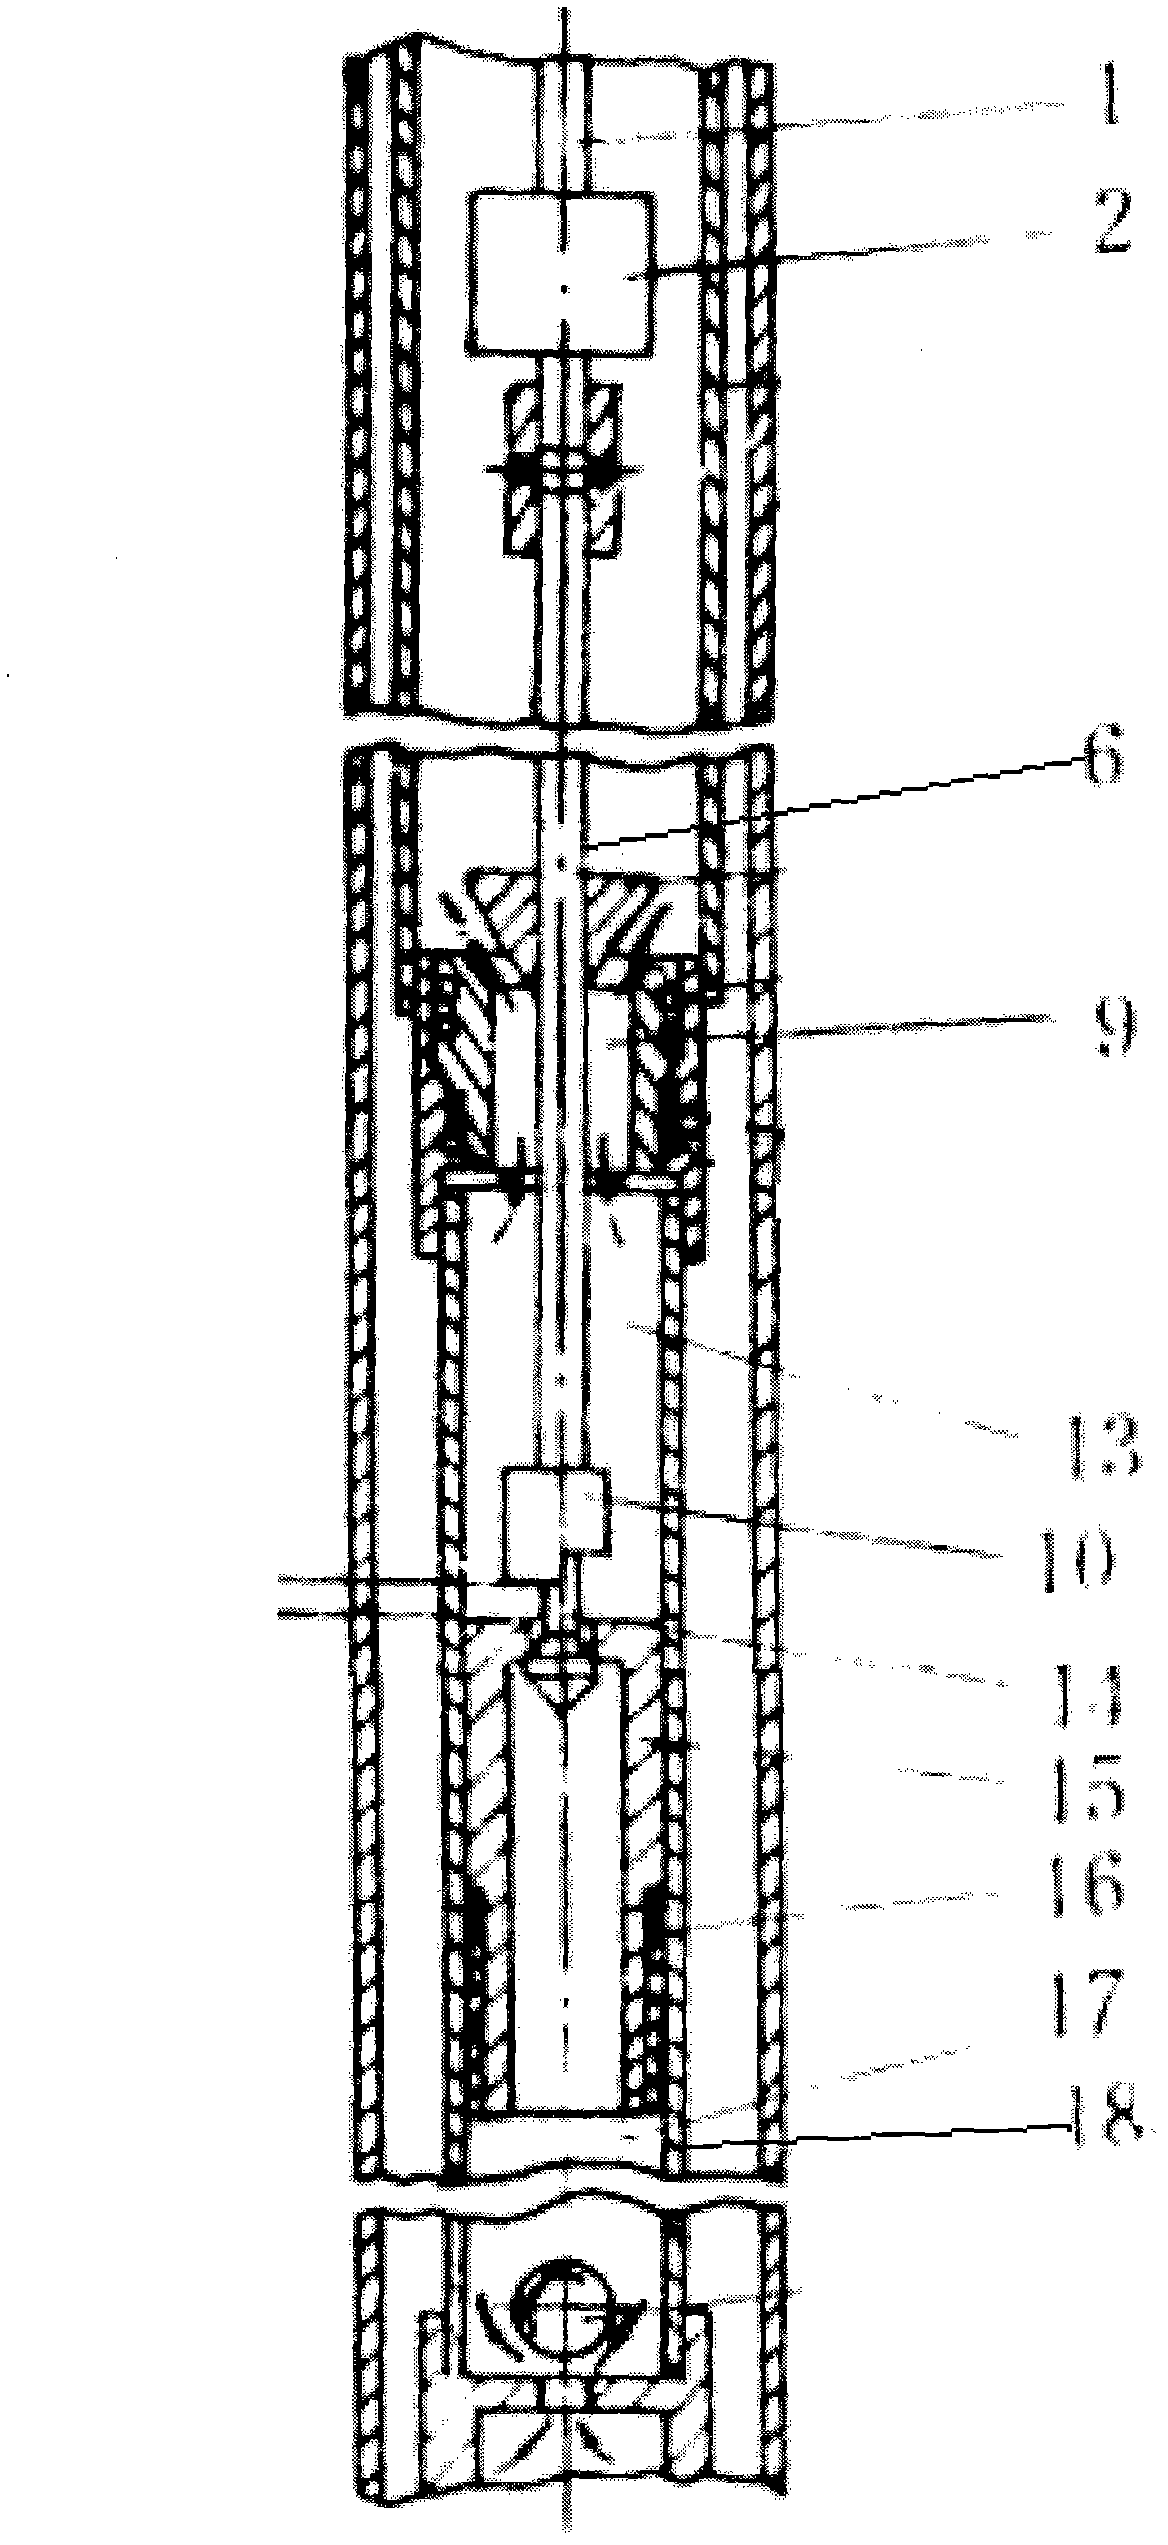 Oil pumping technique based on mechanical open-and-close valve oil well pump